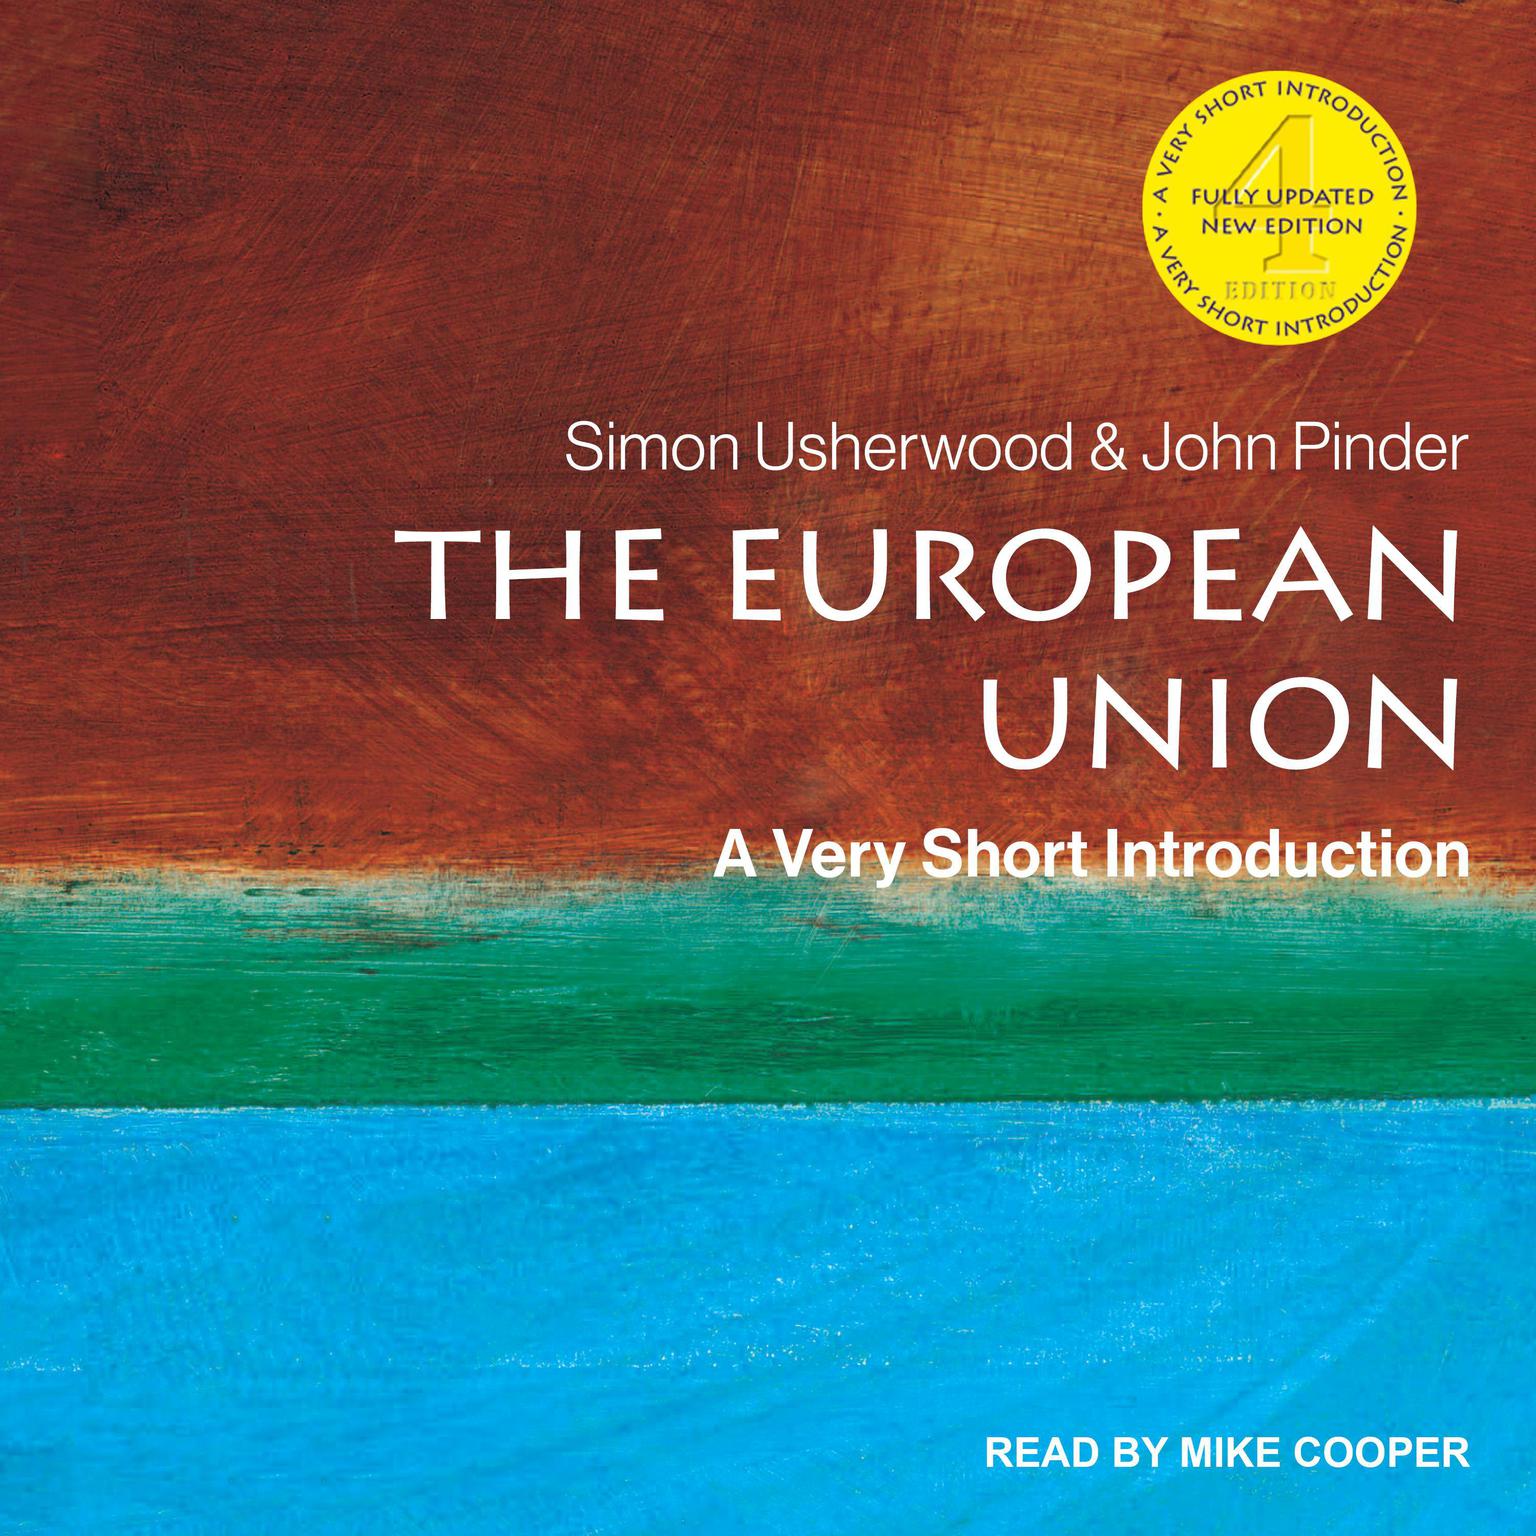 The European Union: A Very Short Introduction, 4th edition Audiobook, by John Pinder